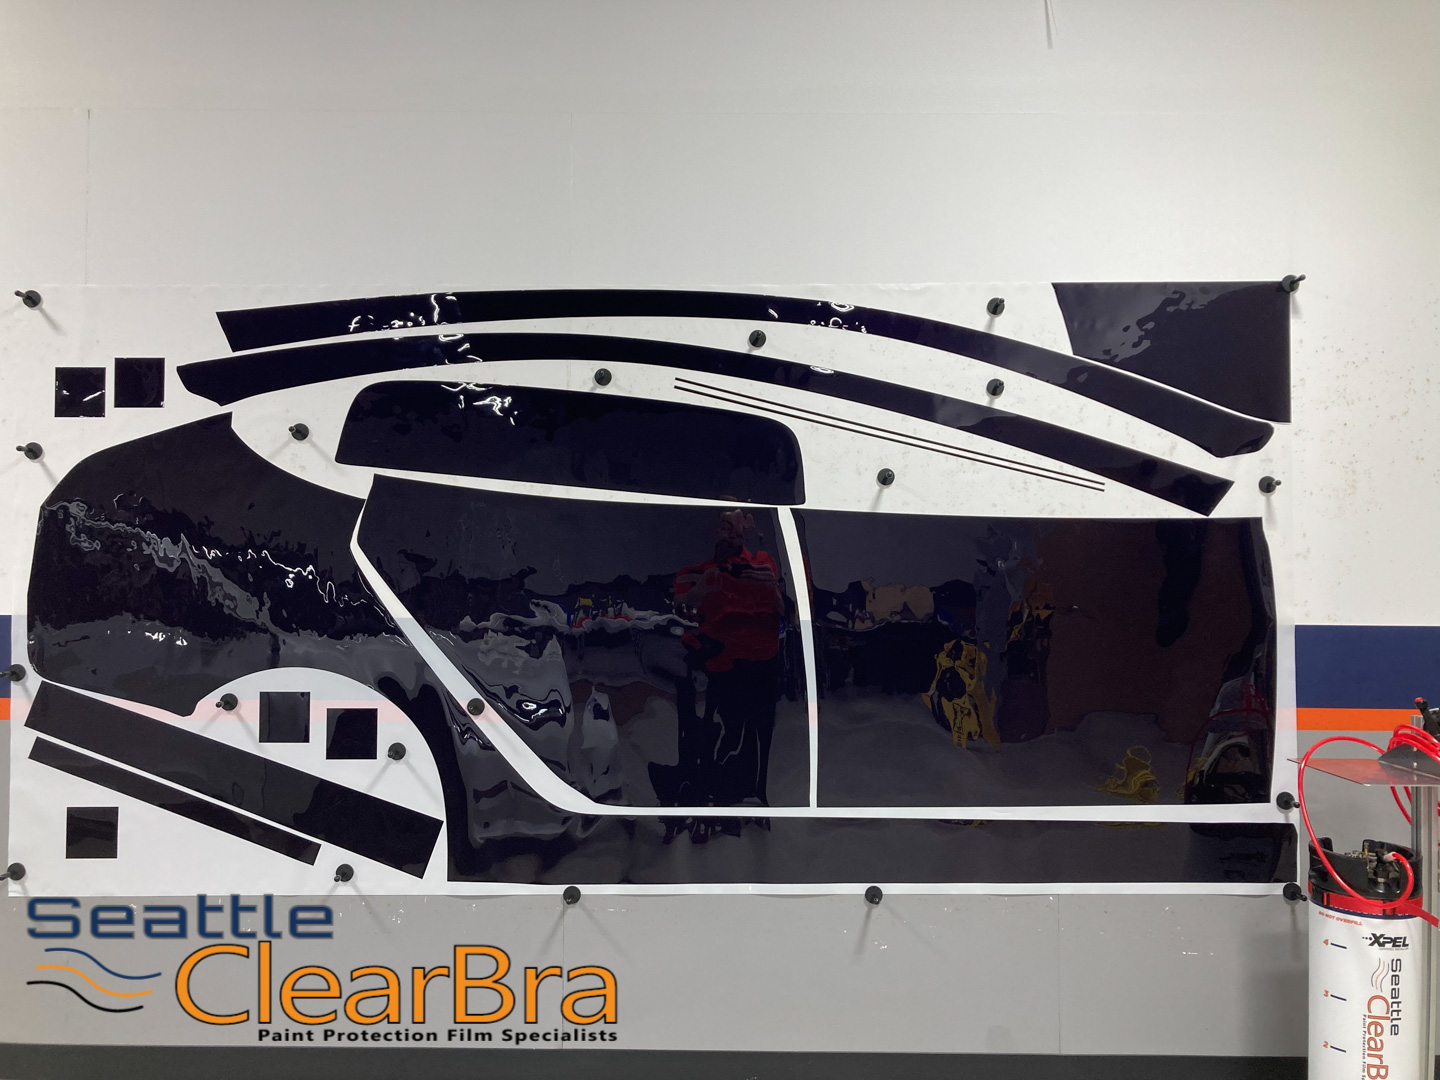 seattle-clearbra-xpel-ultimate-plus-fusion-stealth-prime-redmond-clear-bra-ppf-paint-protectio...jpg